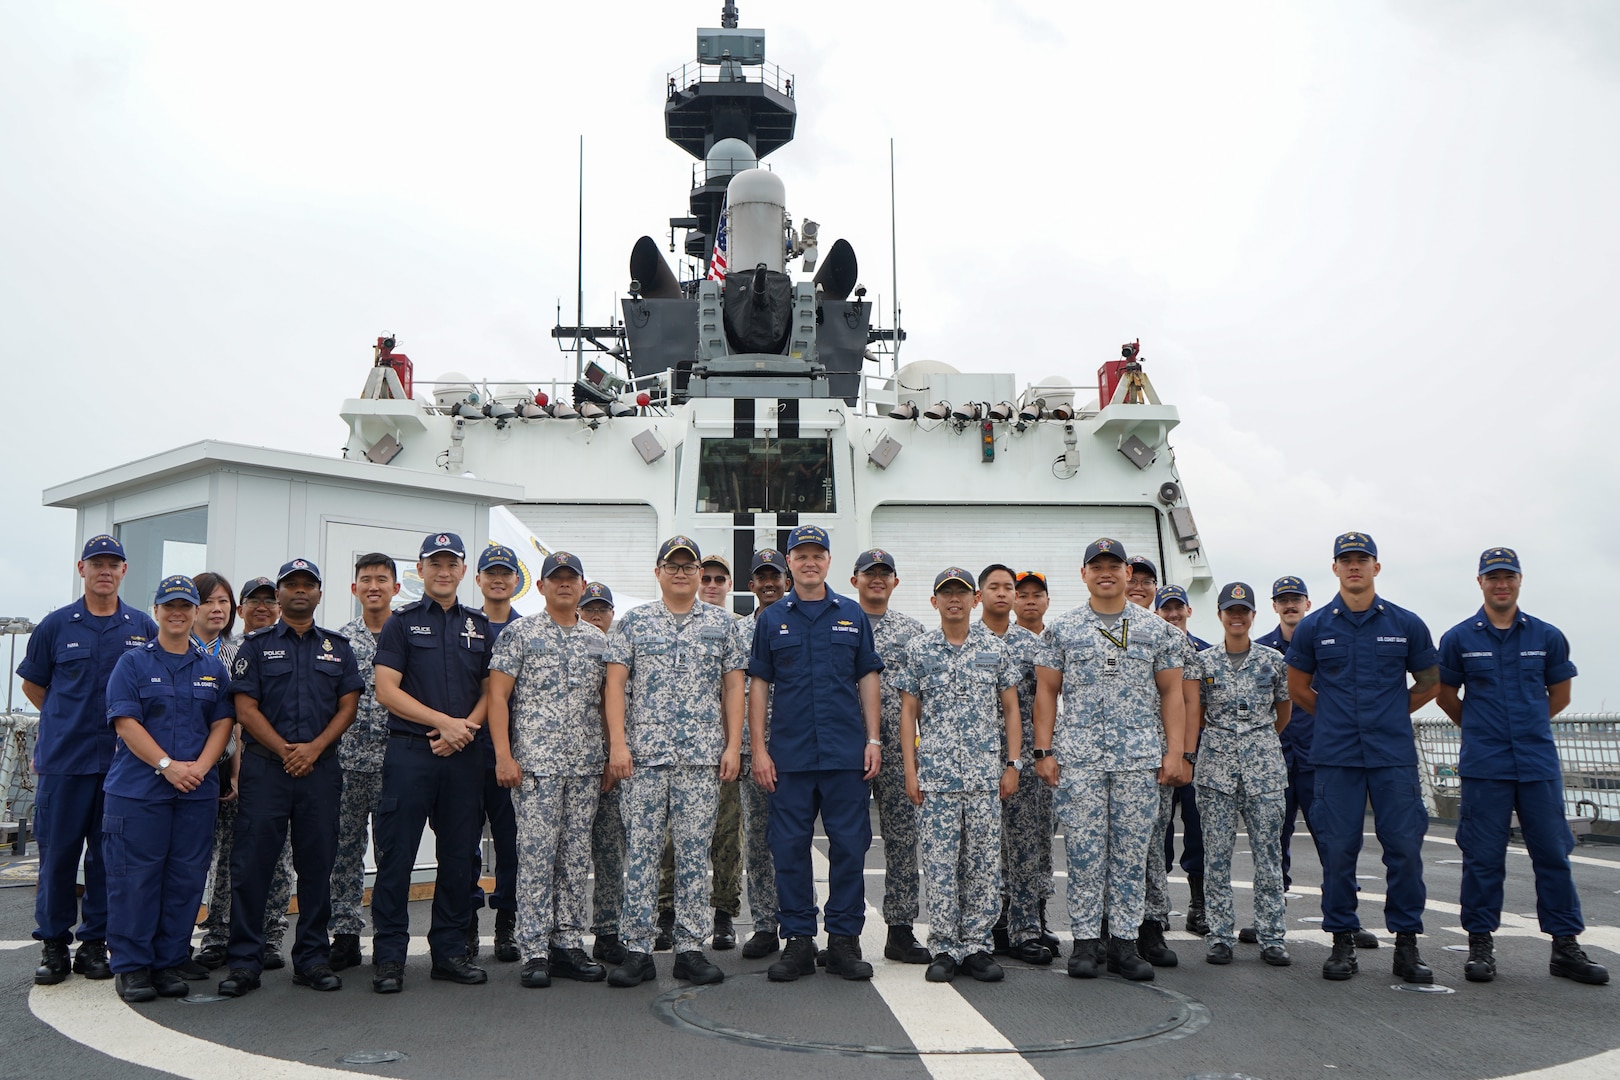 Crewmembers from U.S. Coast Guard Cutter Bertholf (WMSL 750) stand with individuals from the Republic of Singapore Navy and the Singapore Police Coast Guard, after completing a tour aboard the cutter while it was moored in Singapore on Feb. 27, 2024. The Bertholf is a National Security Cutter and can carry a crew of up to 170 people. (U.S. Coast Guard photo by Petty Officer Steve Strohmaier)